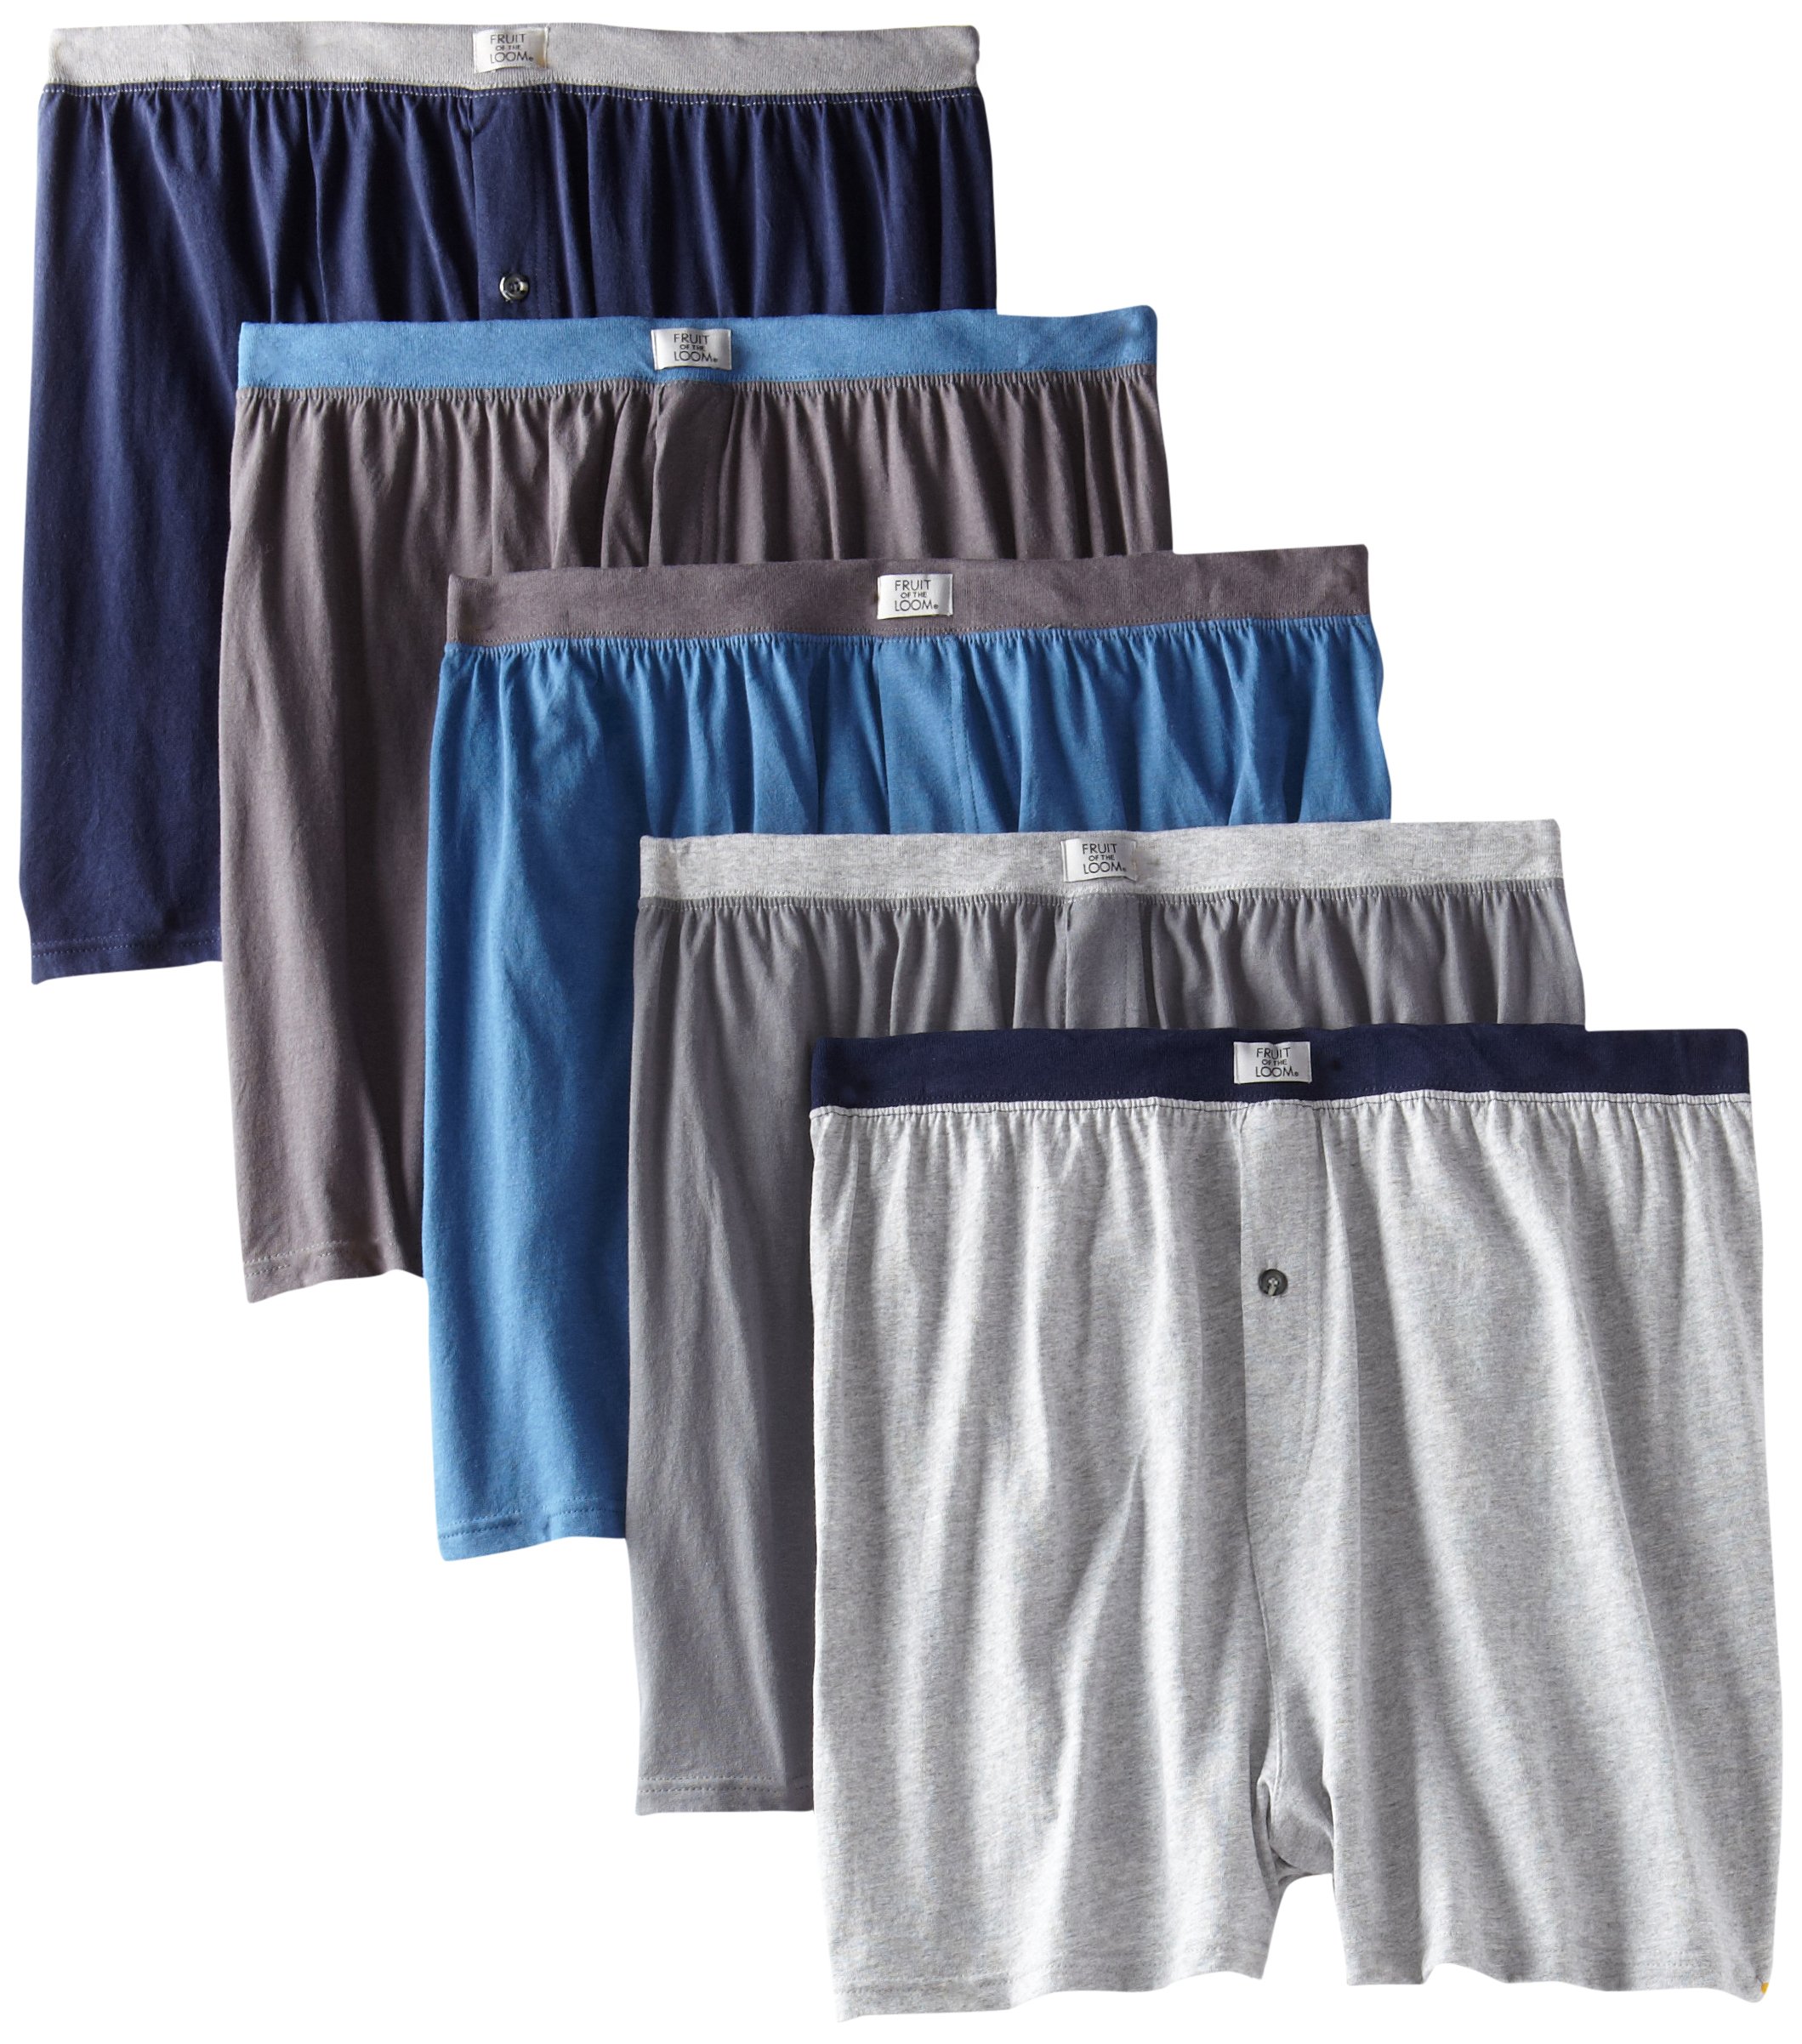 Fruit of the Loom Men's Exposed Waistband Knit Boxer (5 Pack) - image 1 of 2